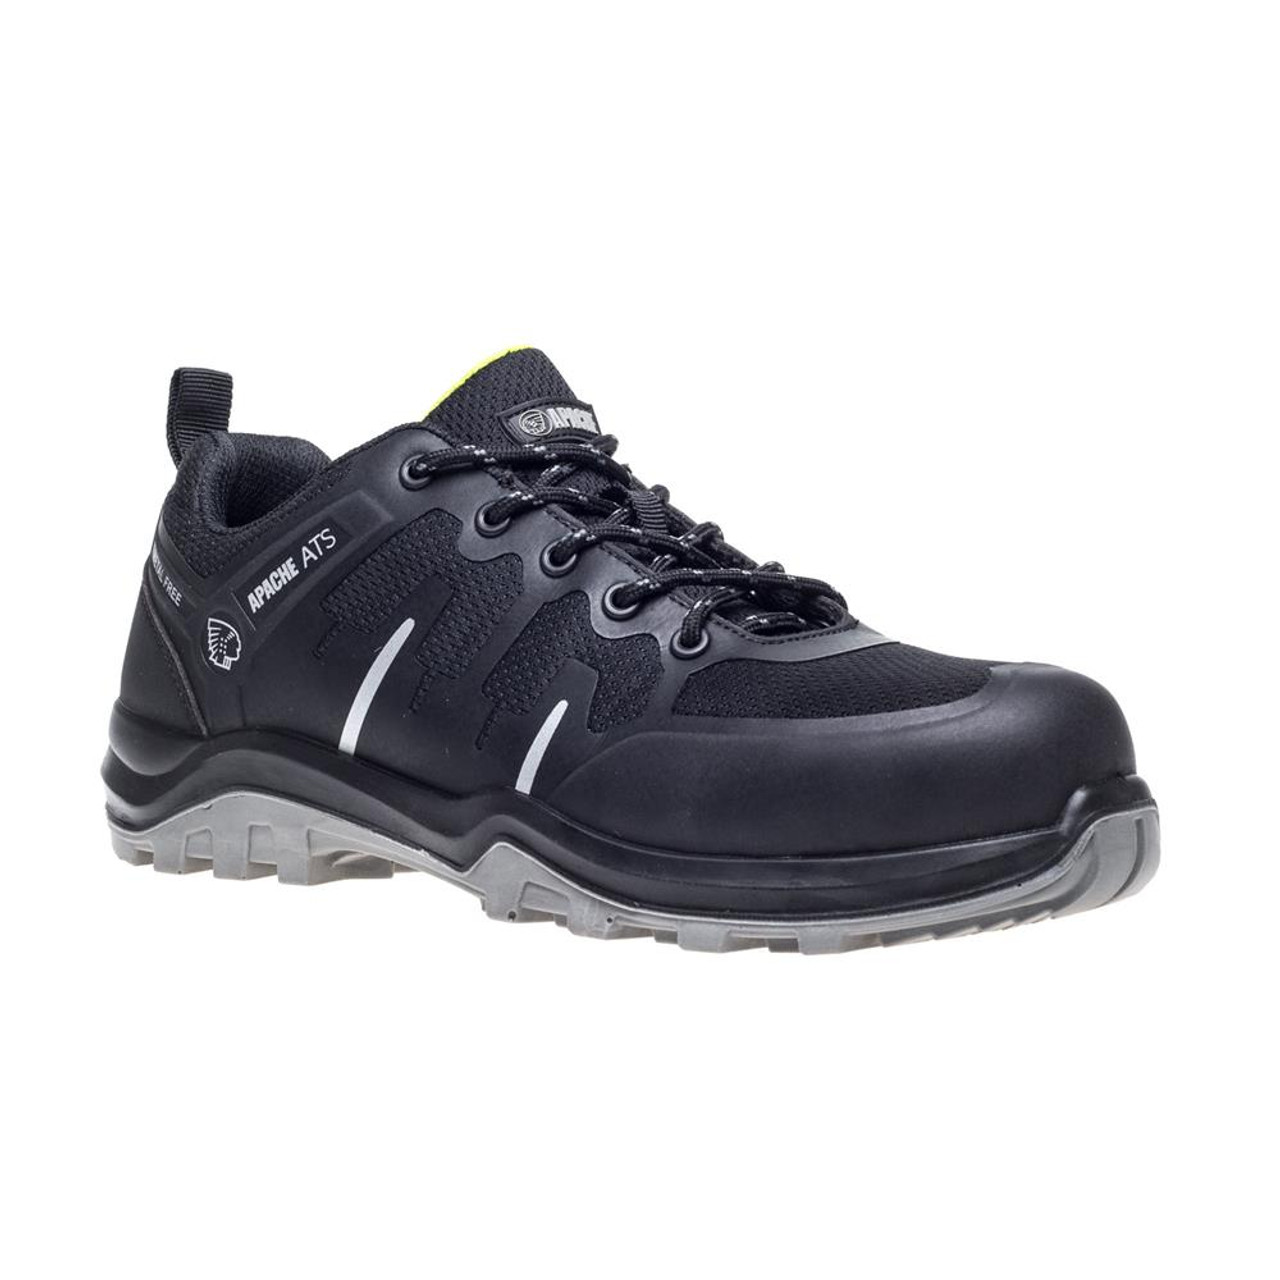 Apache Orion Non-Metallic Safety Trainers - Black | ITS.co.uk|